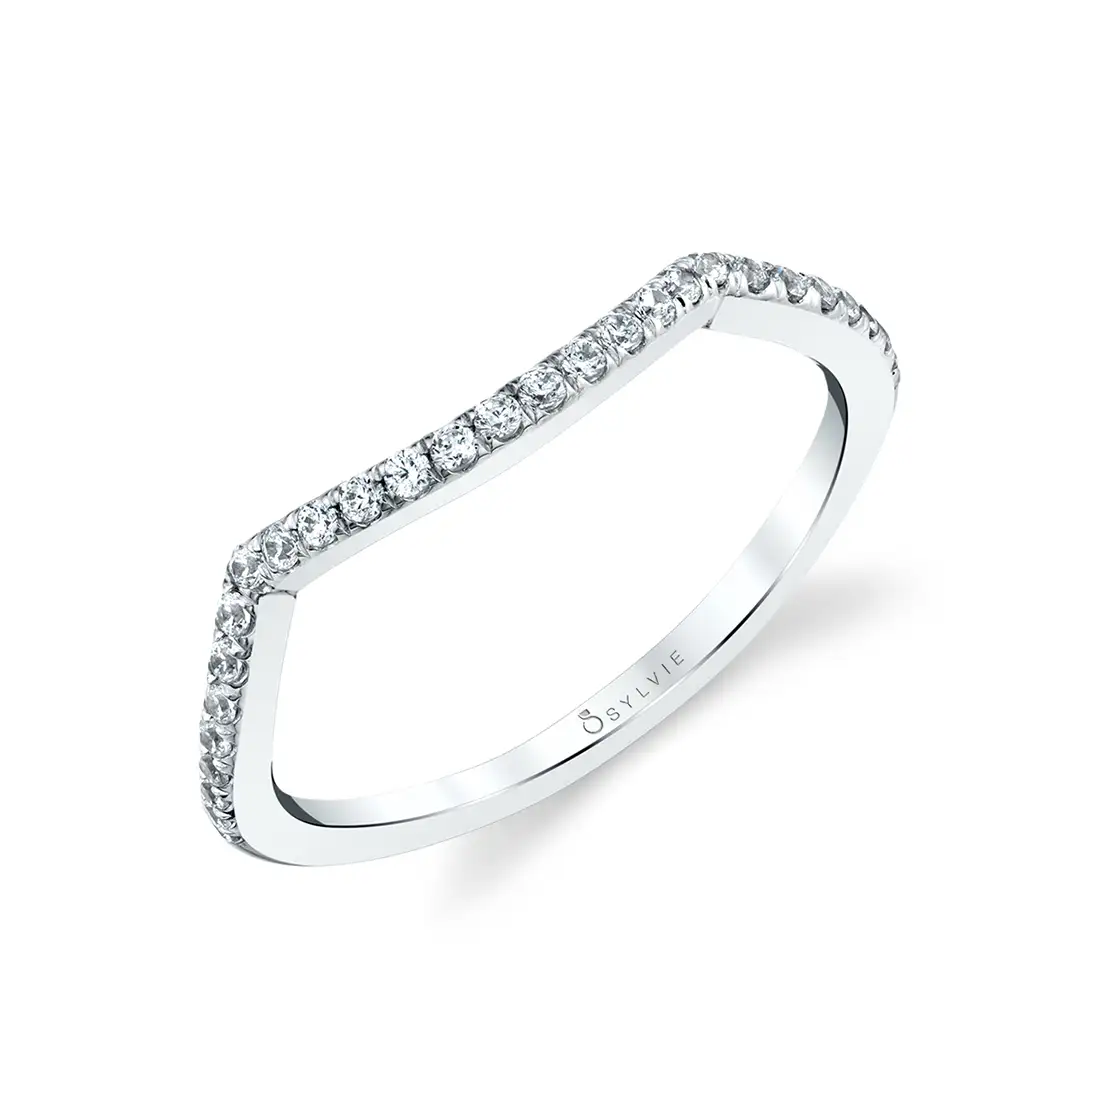 Profile image of a Twisted Engagement Ring with a hidden halo - Agnia Ring